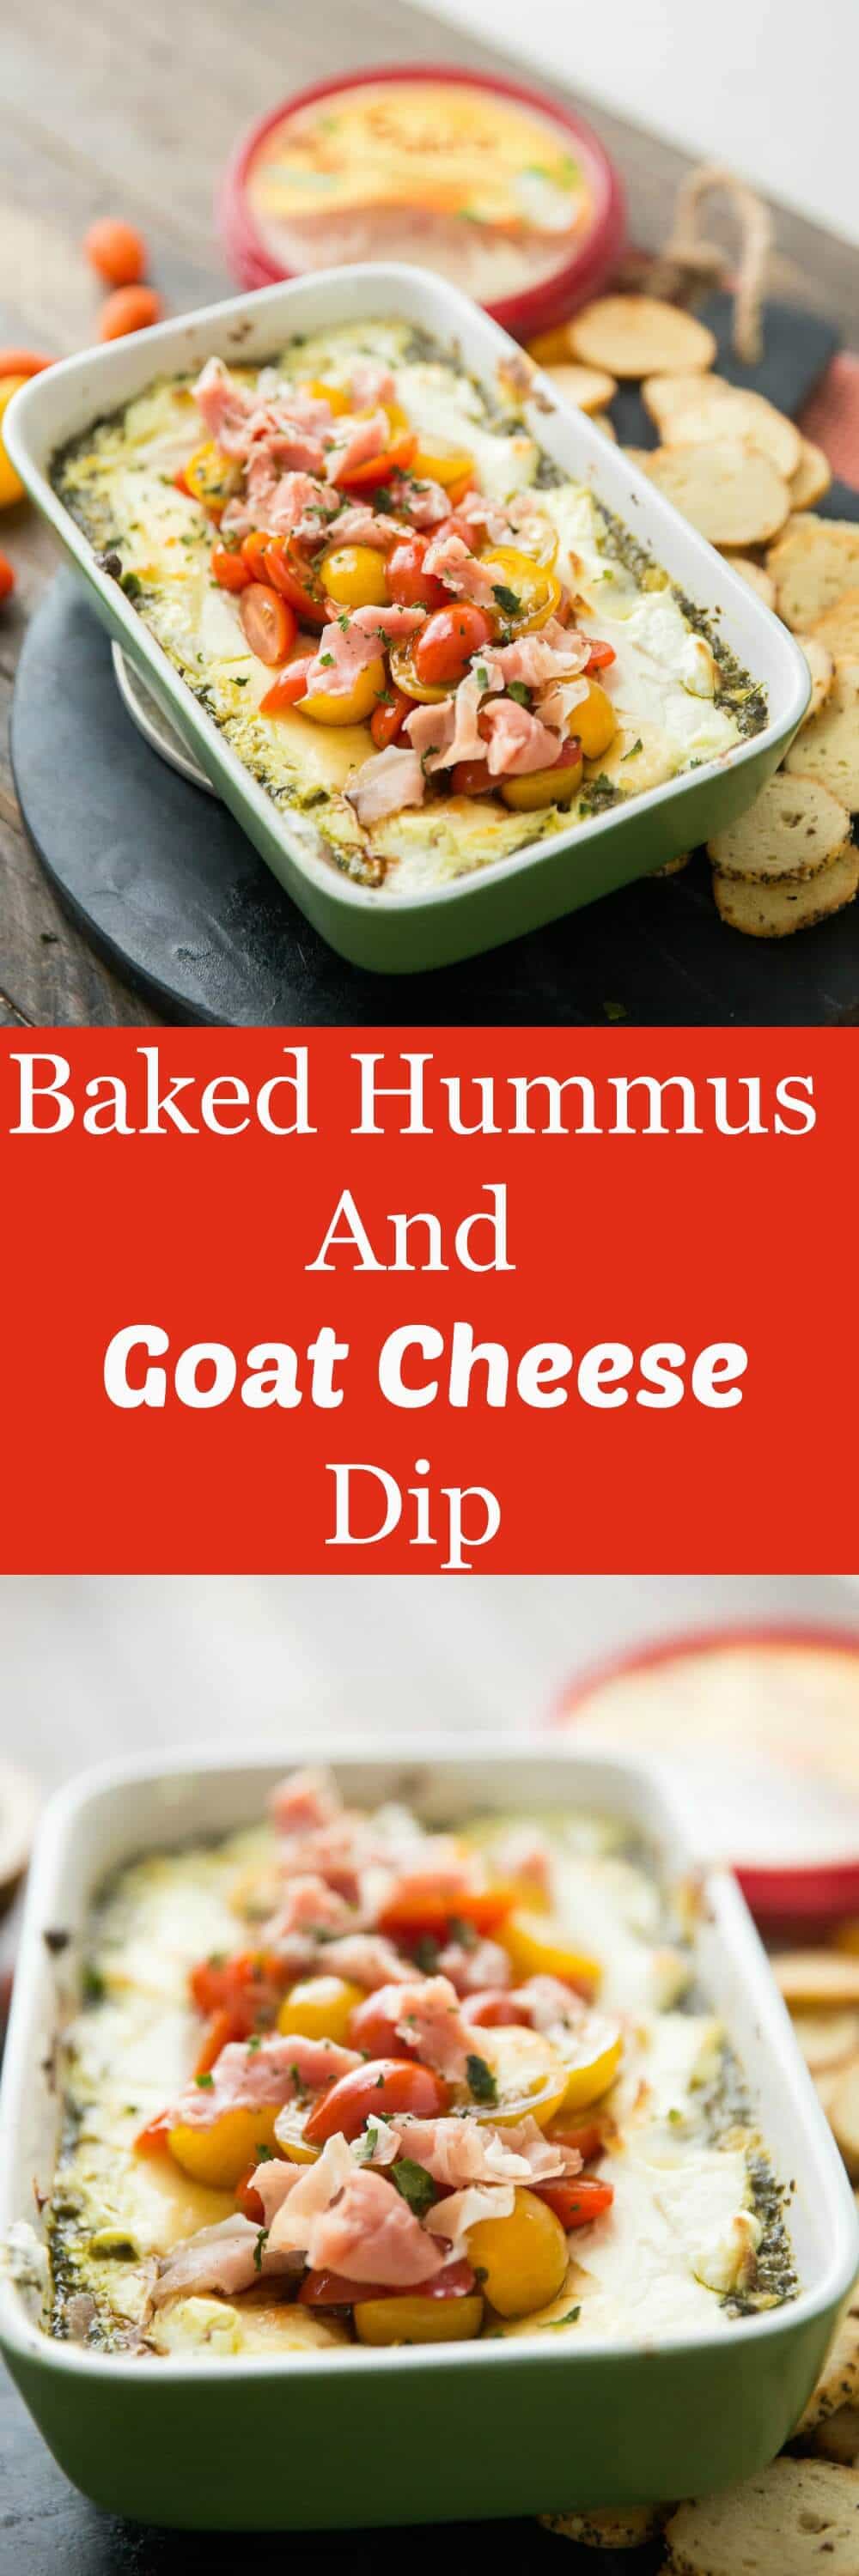 This baked goat cheese dip is so good you could eat it as a meal! The cheese is hot and bubbly and the layers o flavor are amazing!